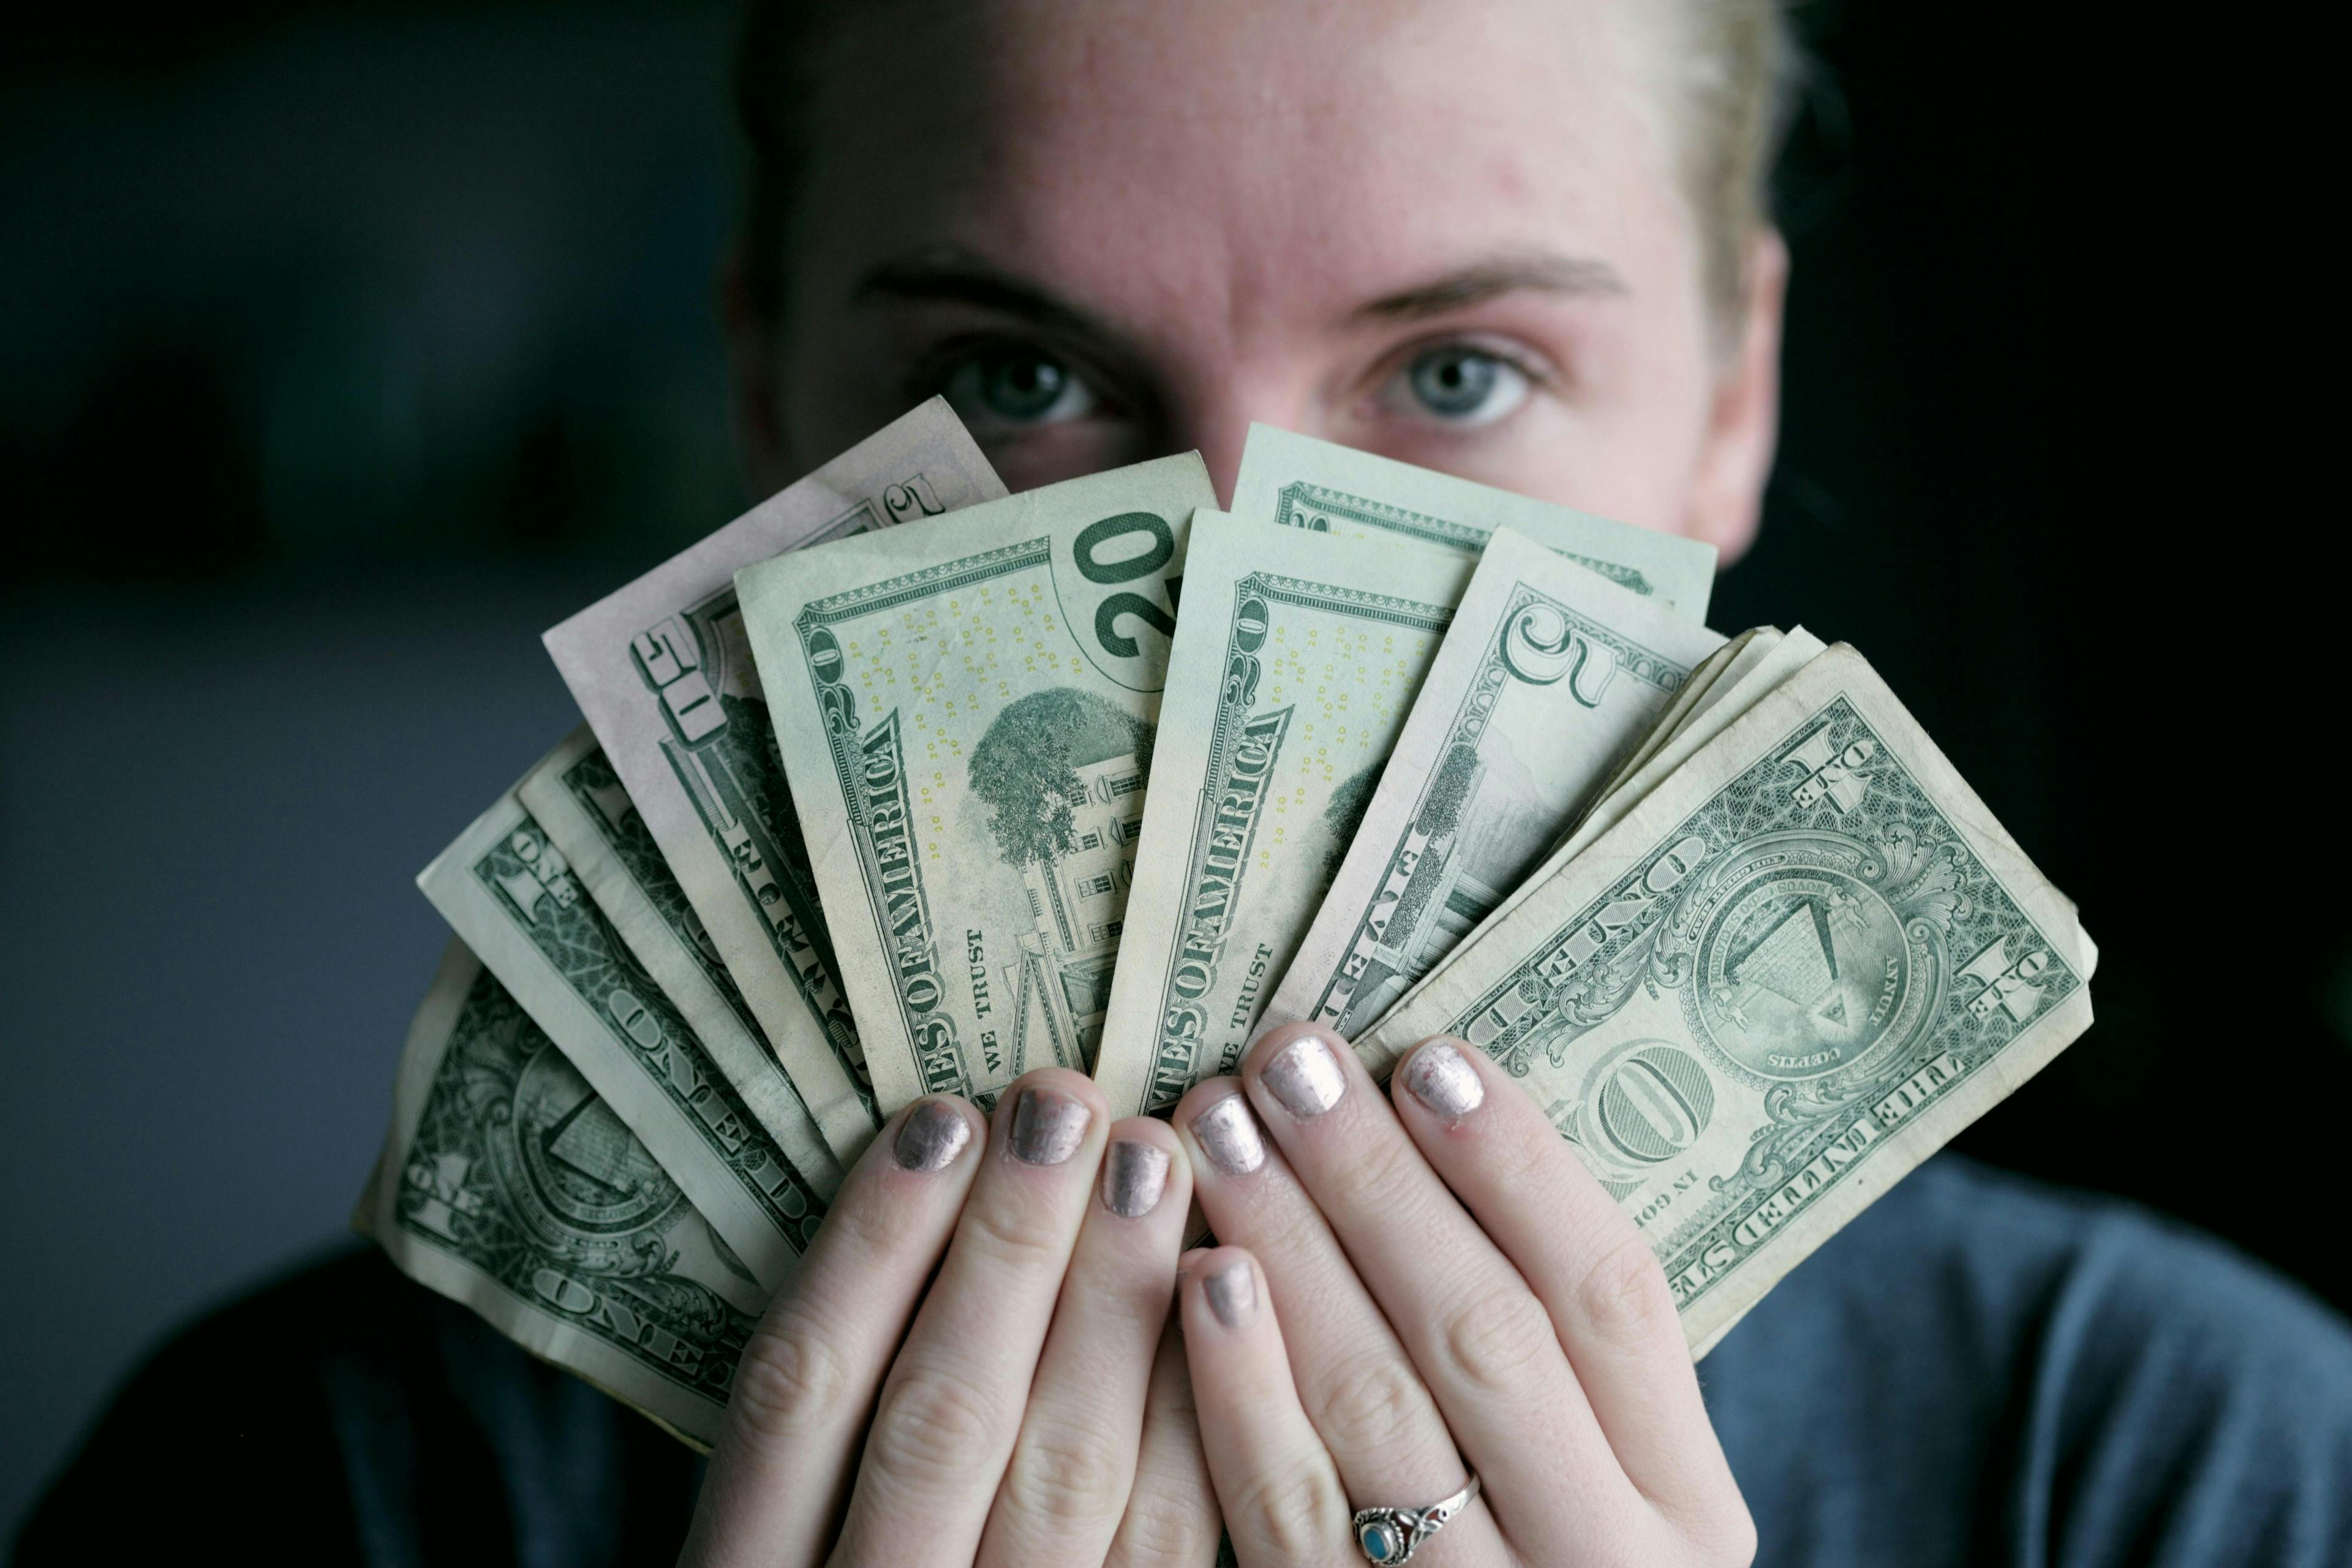 Hands fanning out several US dollar bills in multiple denominations, partially covering a person’s face in the background. The context is dark and indistinct.